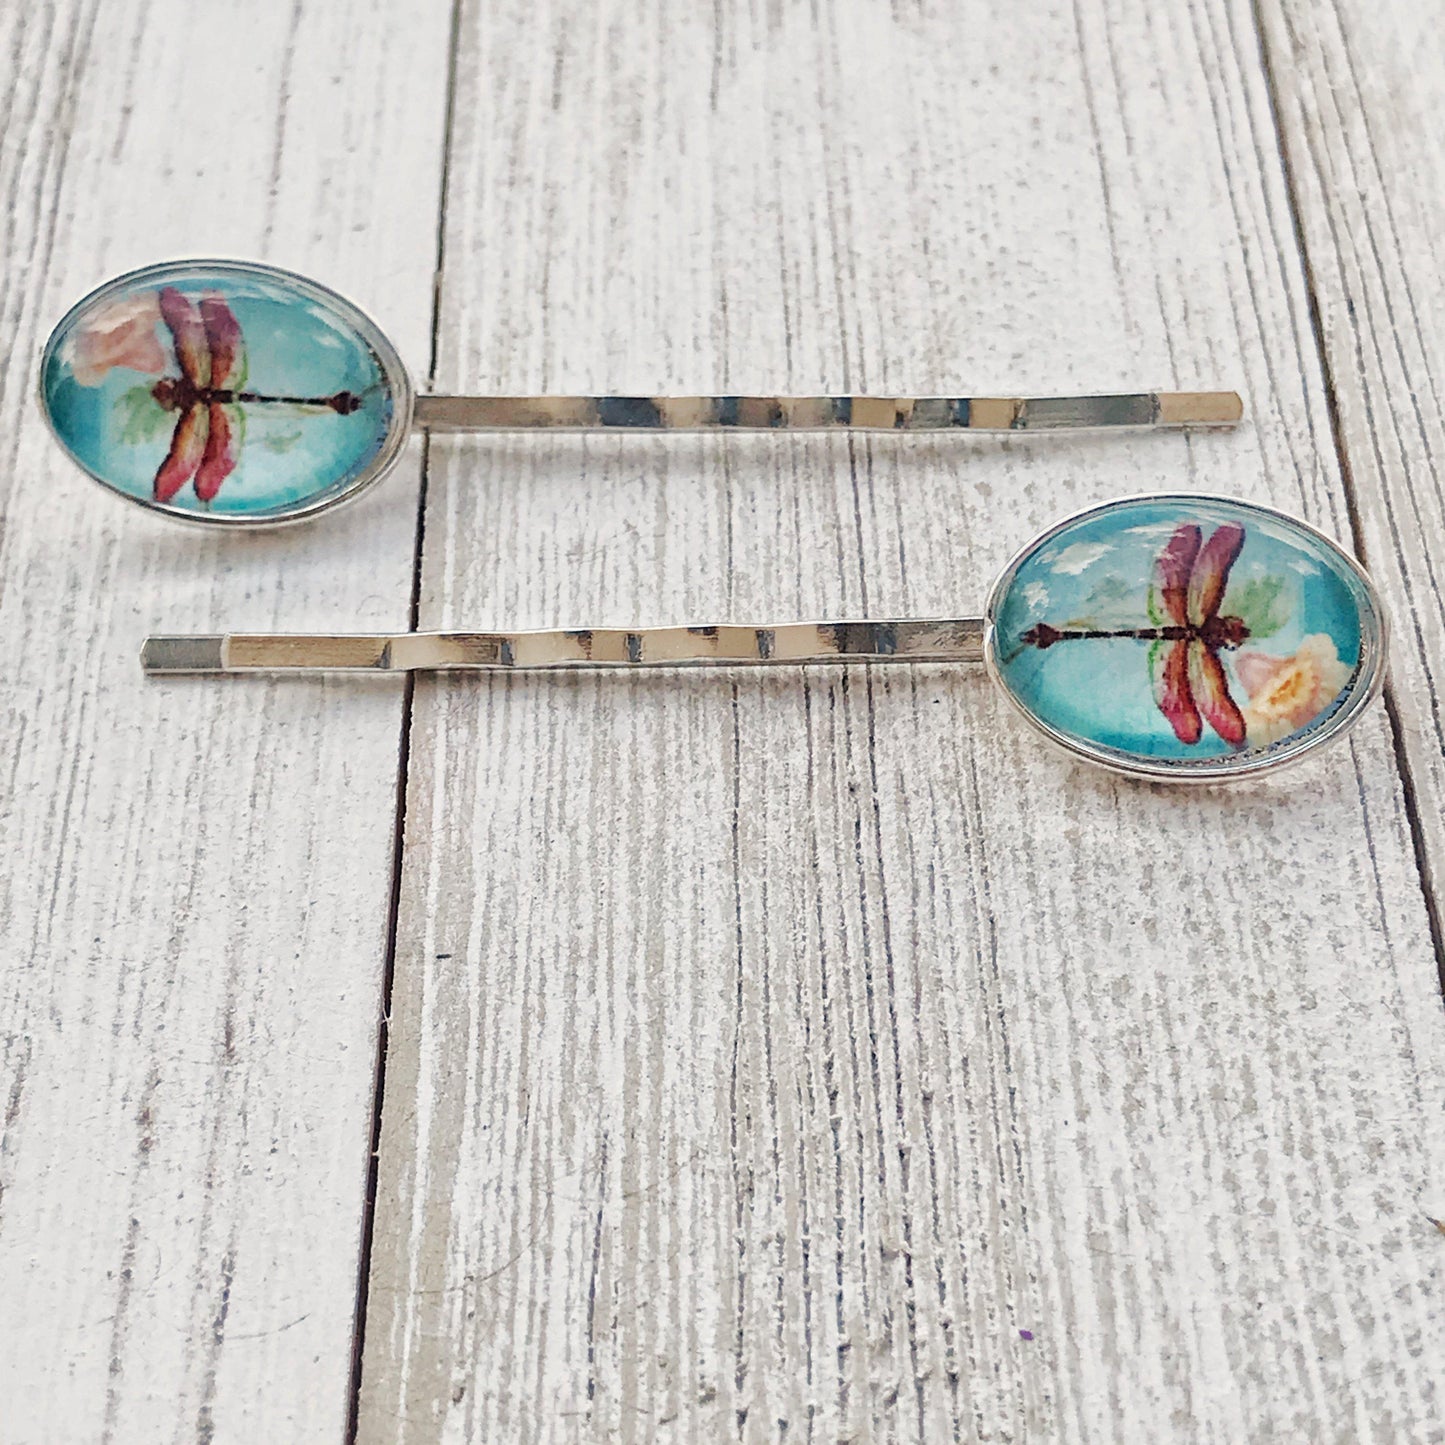 Dragonfly Floral Hair Pins - Delicate Accessories for Women's Hairstyles